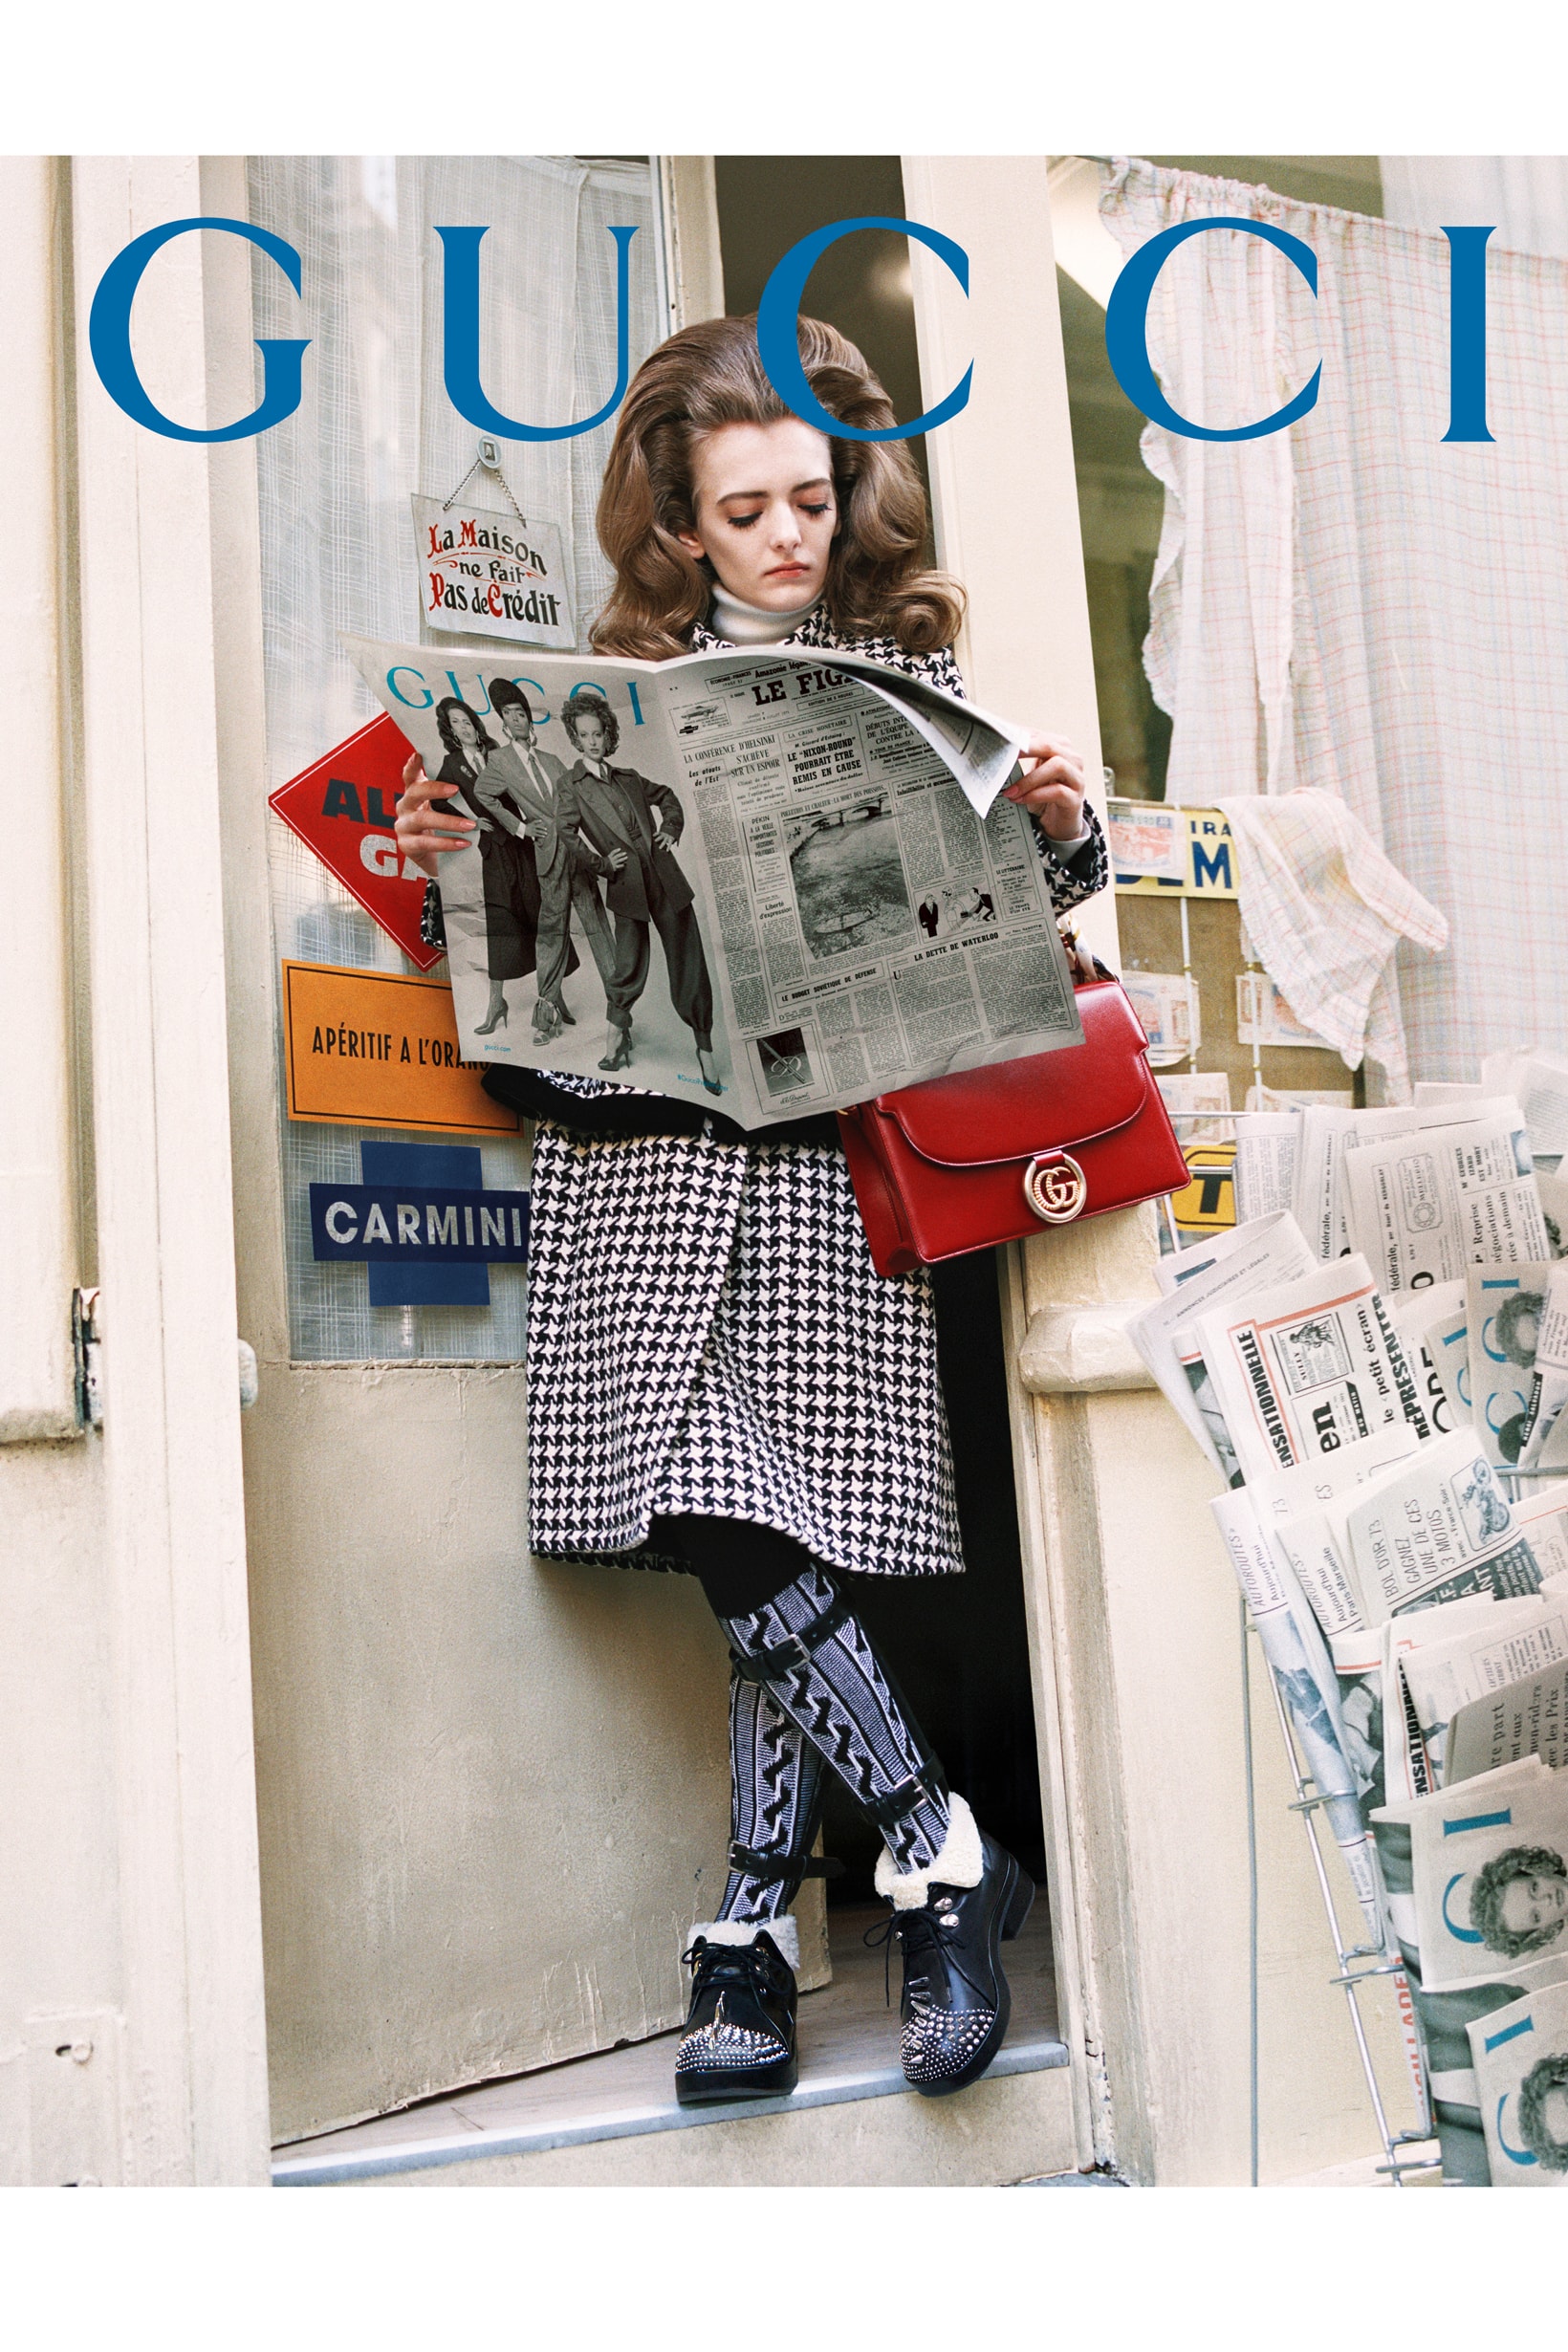 GucciPretAPorter Fall Winter 2019 Campaign Jacket Shoes Blue Bag Red